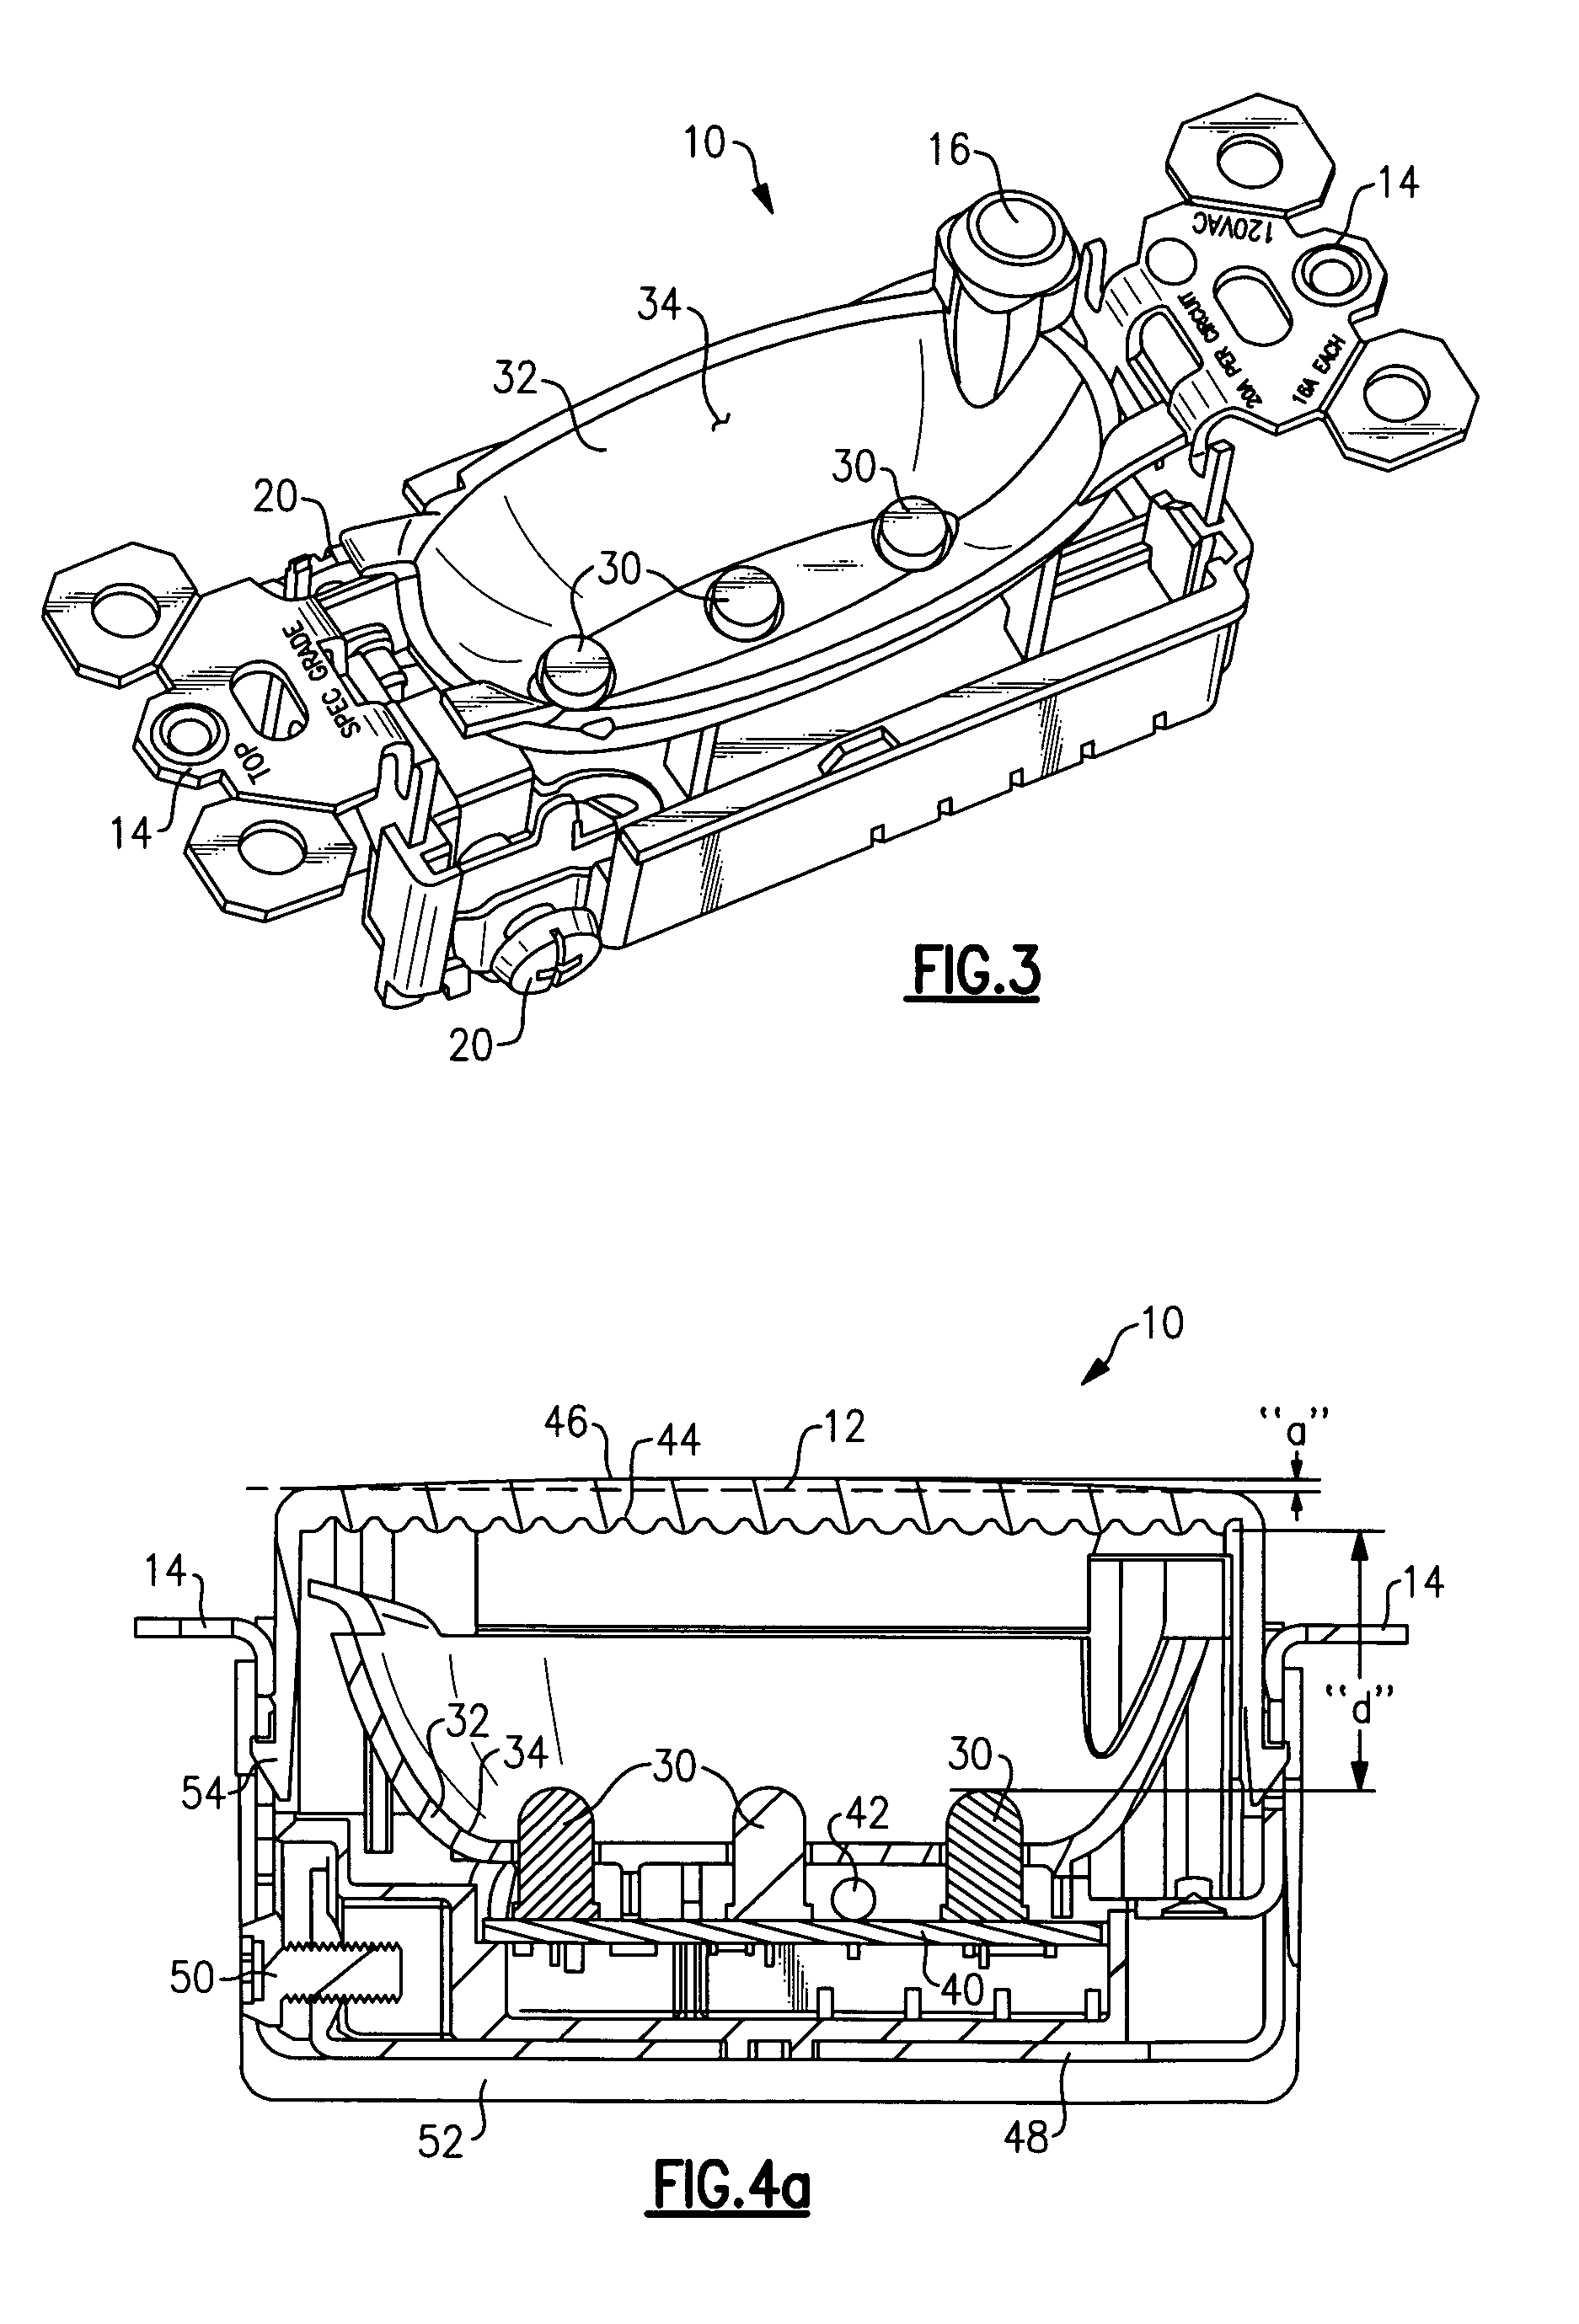 Electrical lighting device